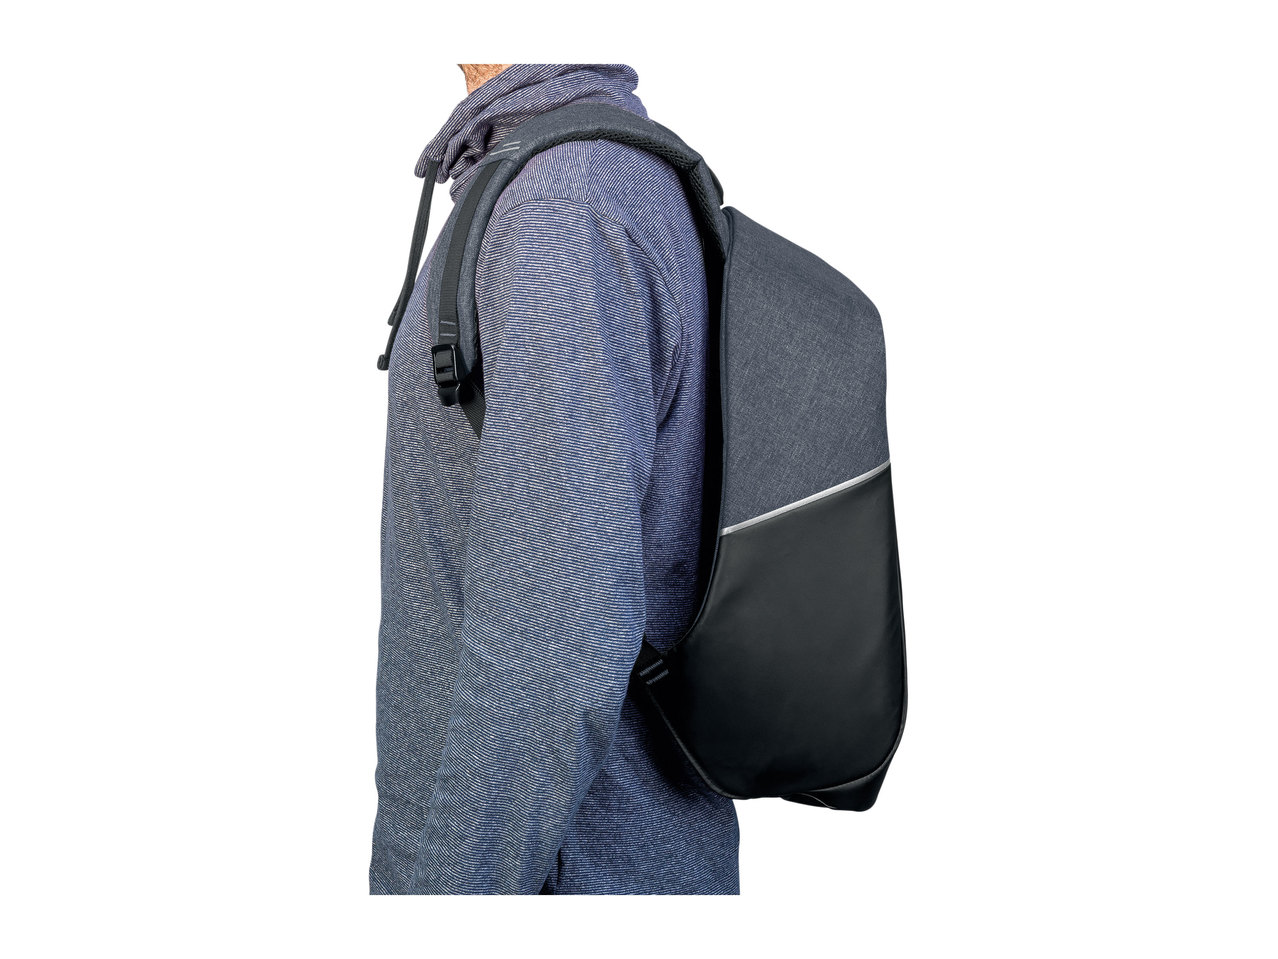 Top Move Anti-Theft Backpack1